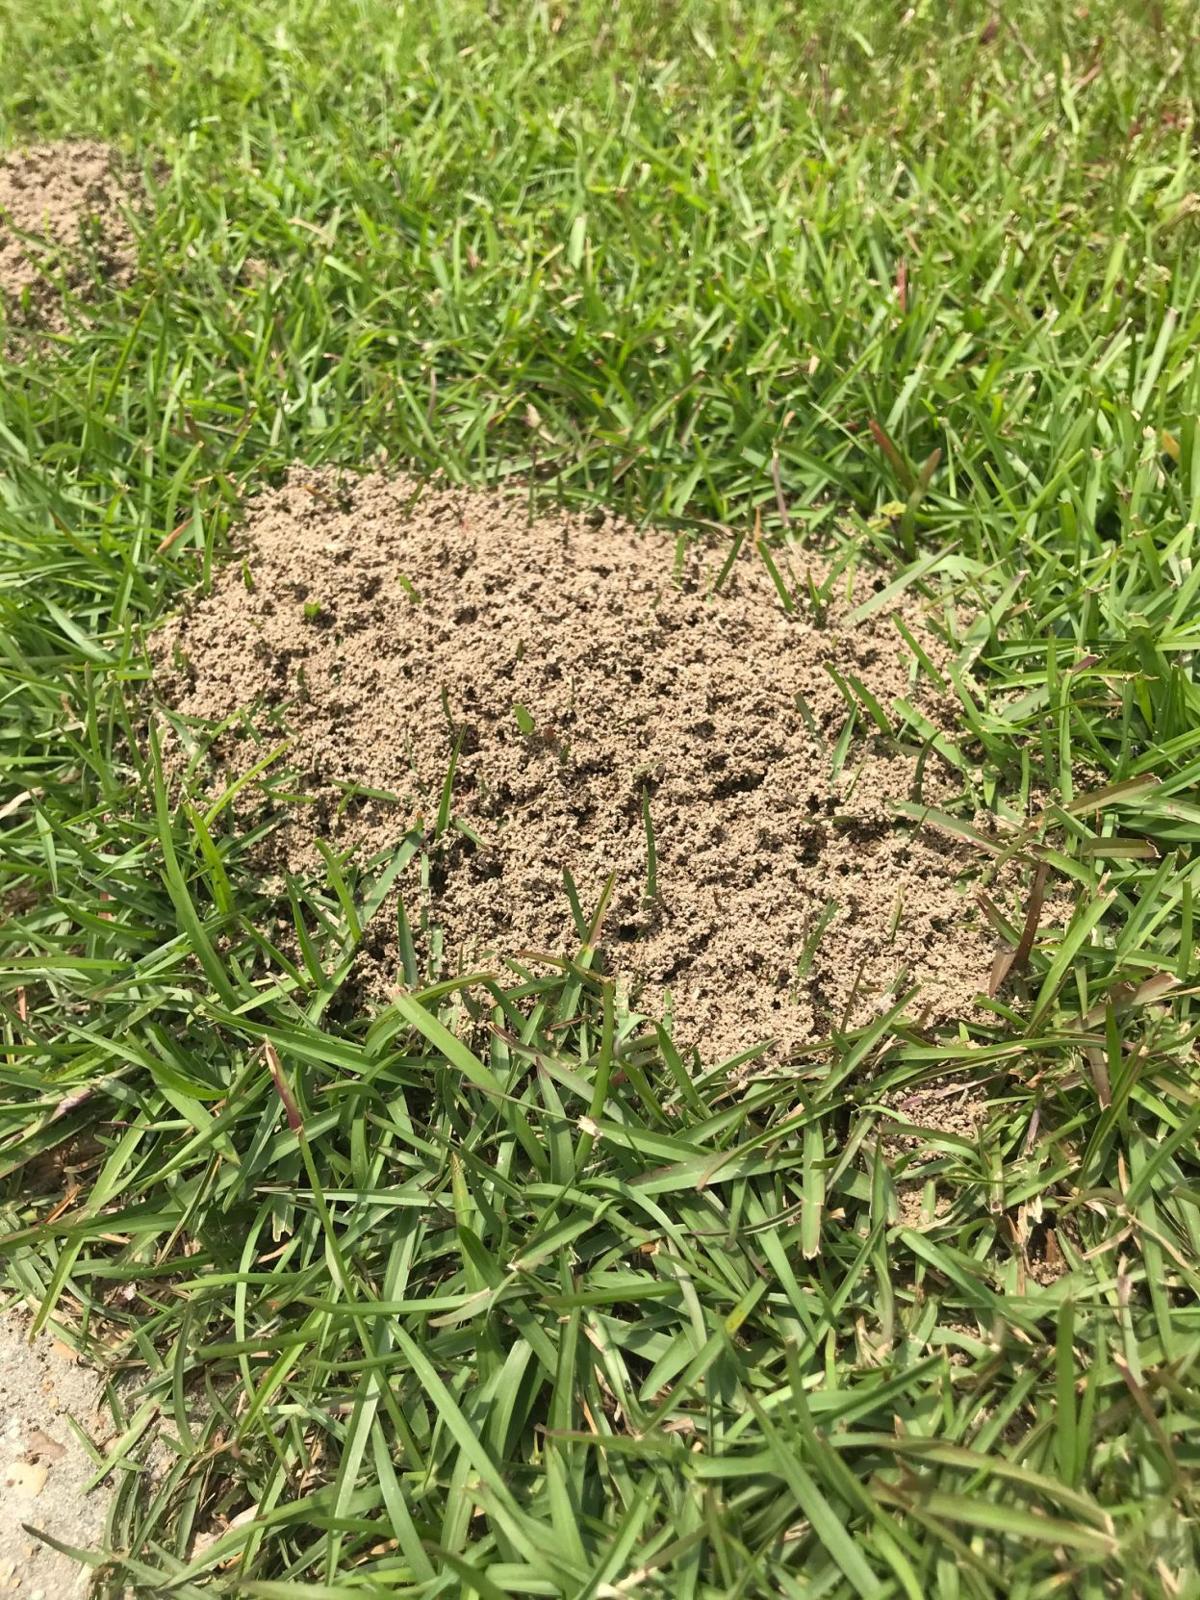 Lsu Garden News Fire Ants Bite Sting And Can Spread Out 25 Feet From The Mound Yikes Home Garden Theadvocate Com